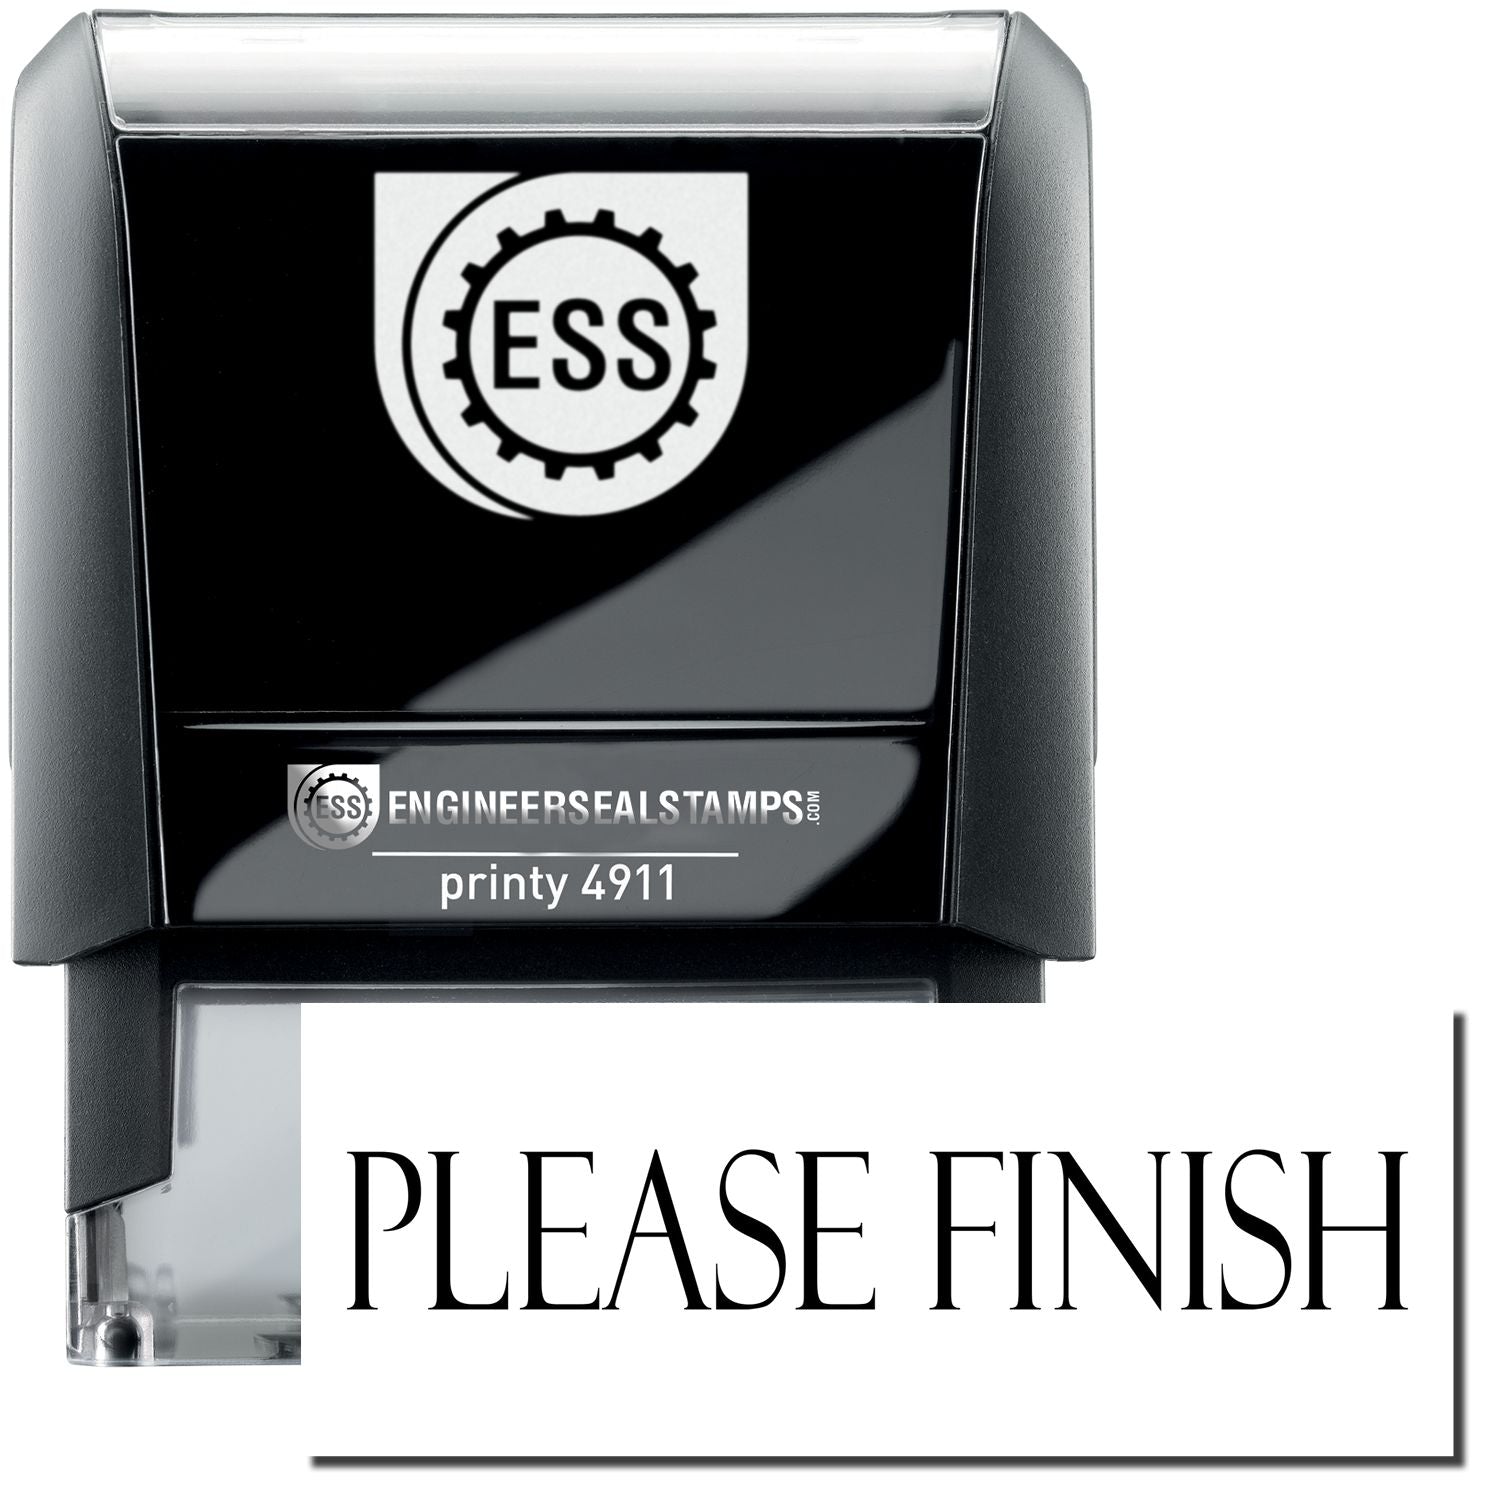 A self-inking stamp with a stamped image showing how the text "PLEASE FINISH" is displayed after stamping.